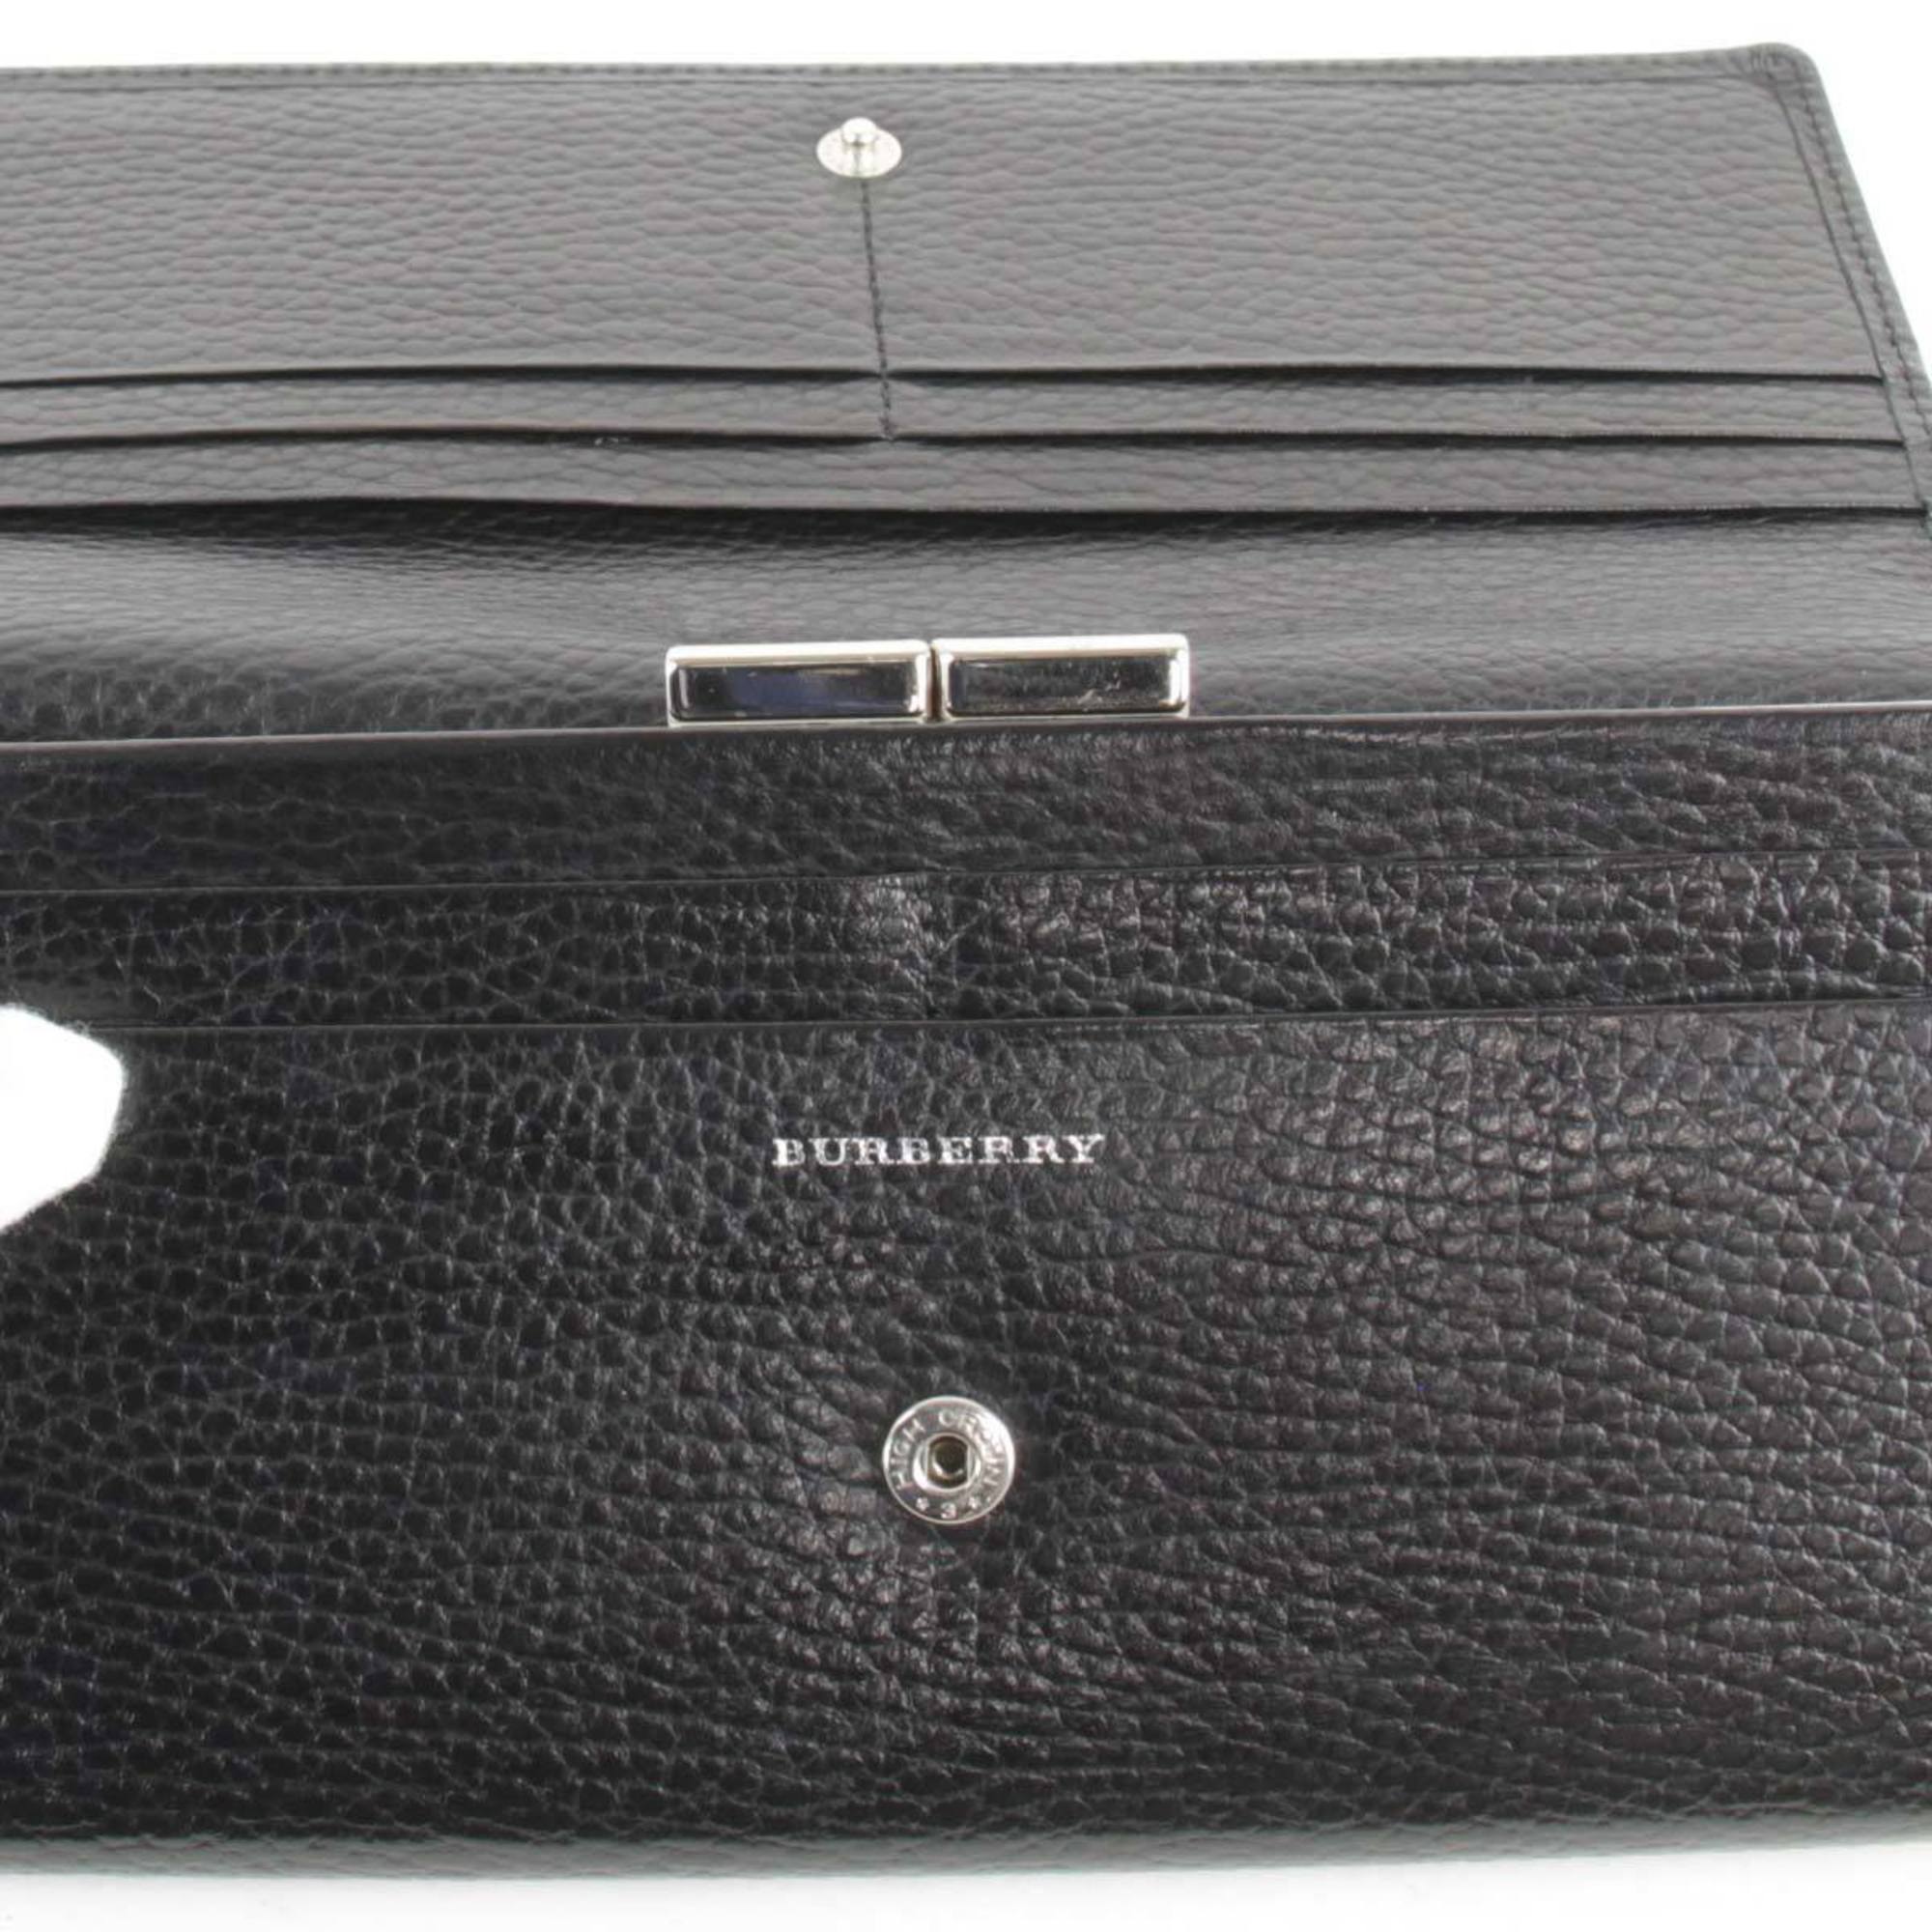 BURBERRY Long wallet in leather, black